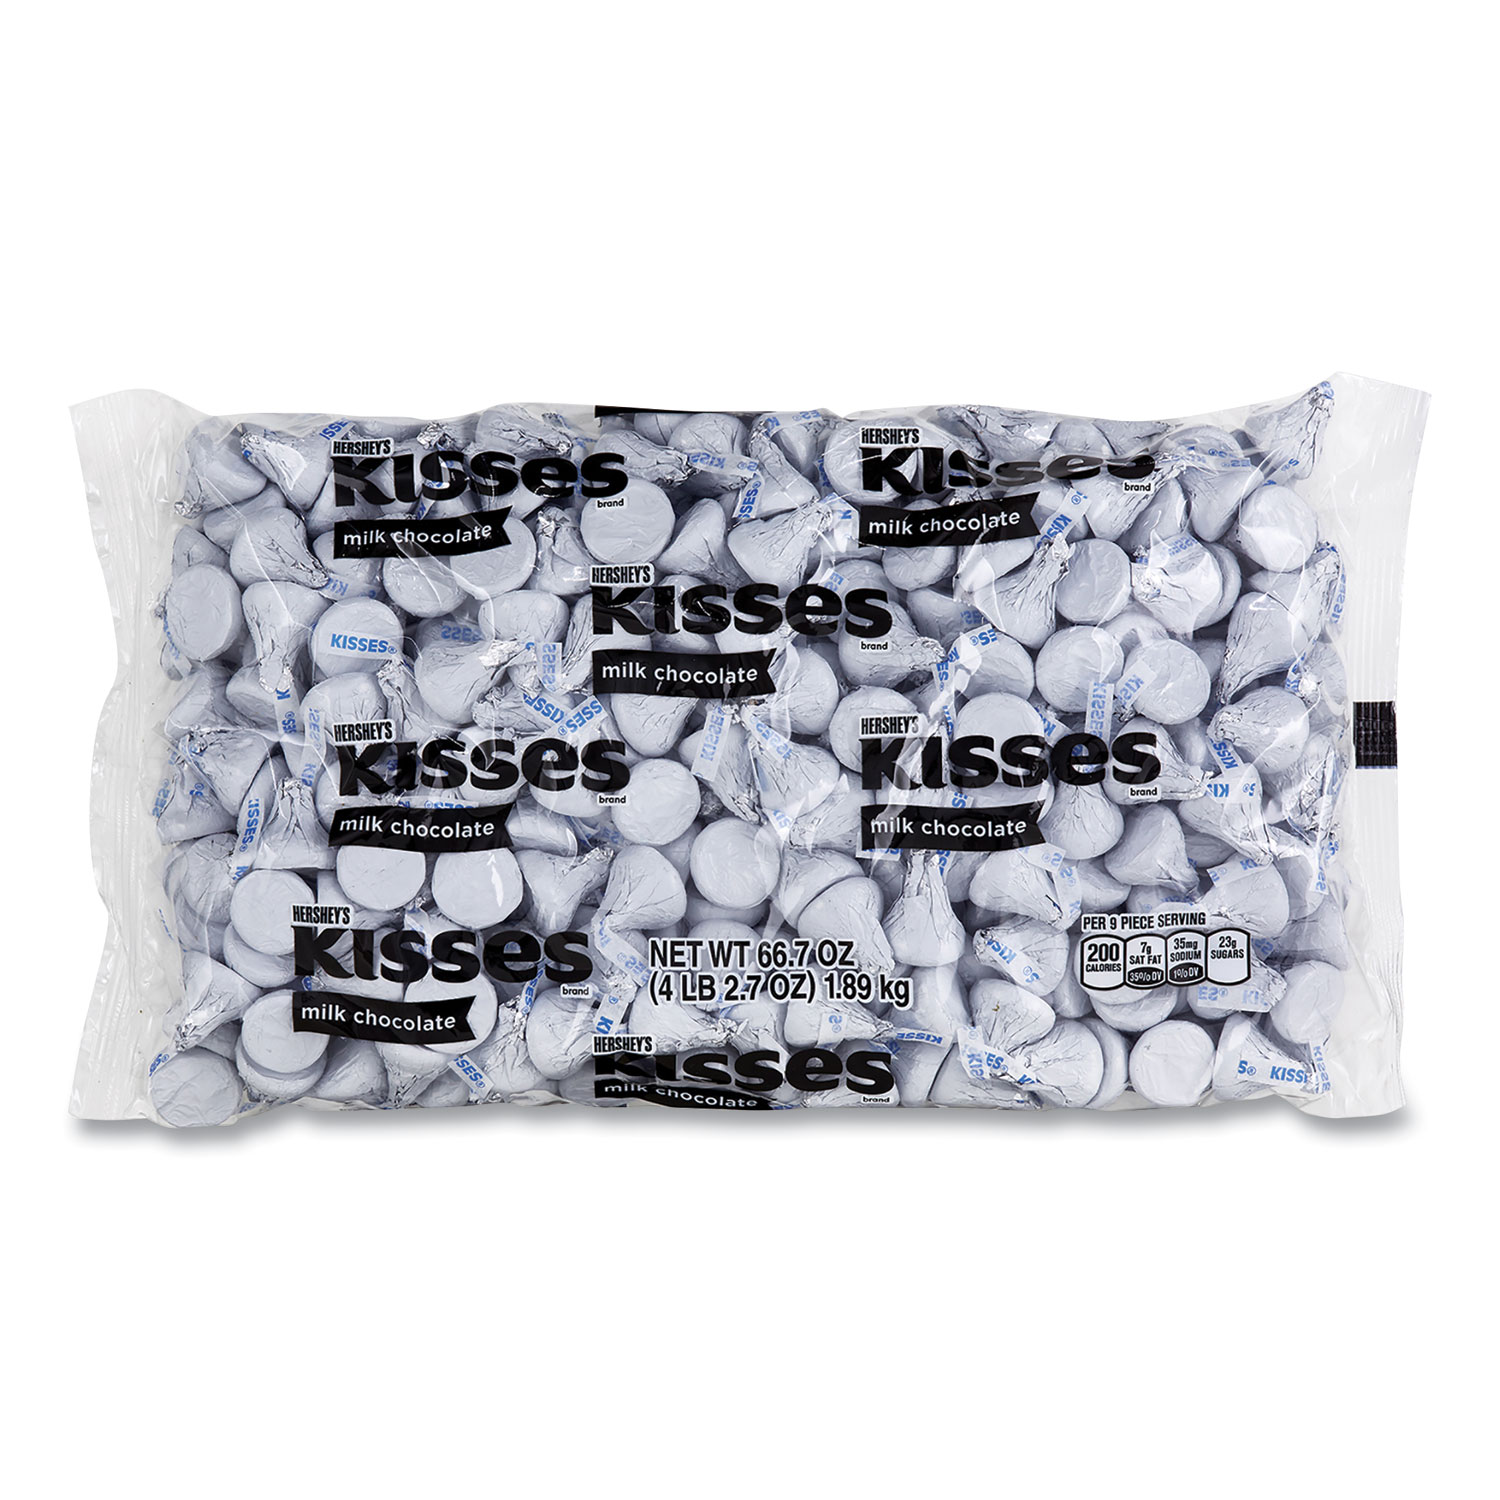  Hershey's 13314 KISSES, Milk Chocolate, White Wrappers, 66.7 oz Bag, Free Delivery in 1-4 Business Days (GRR24600242) 